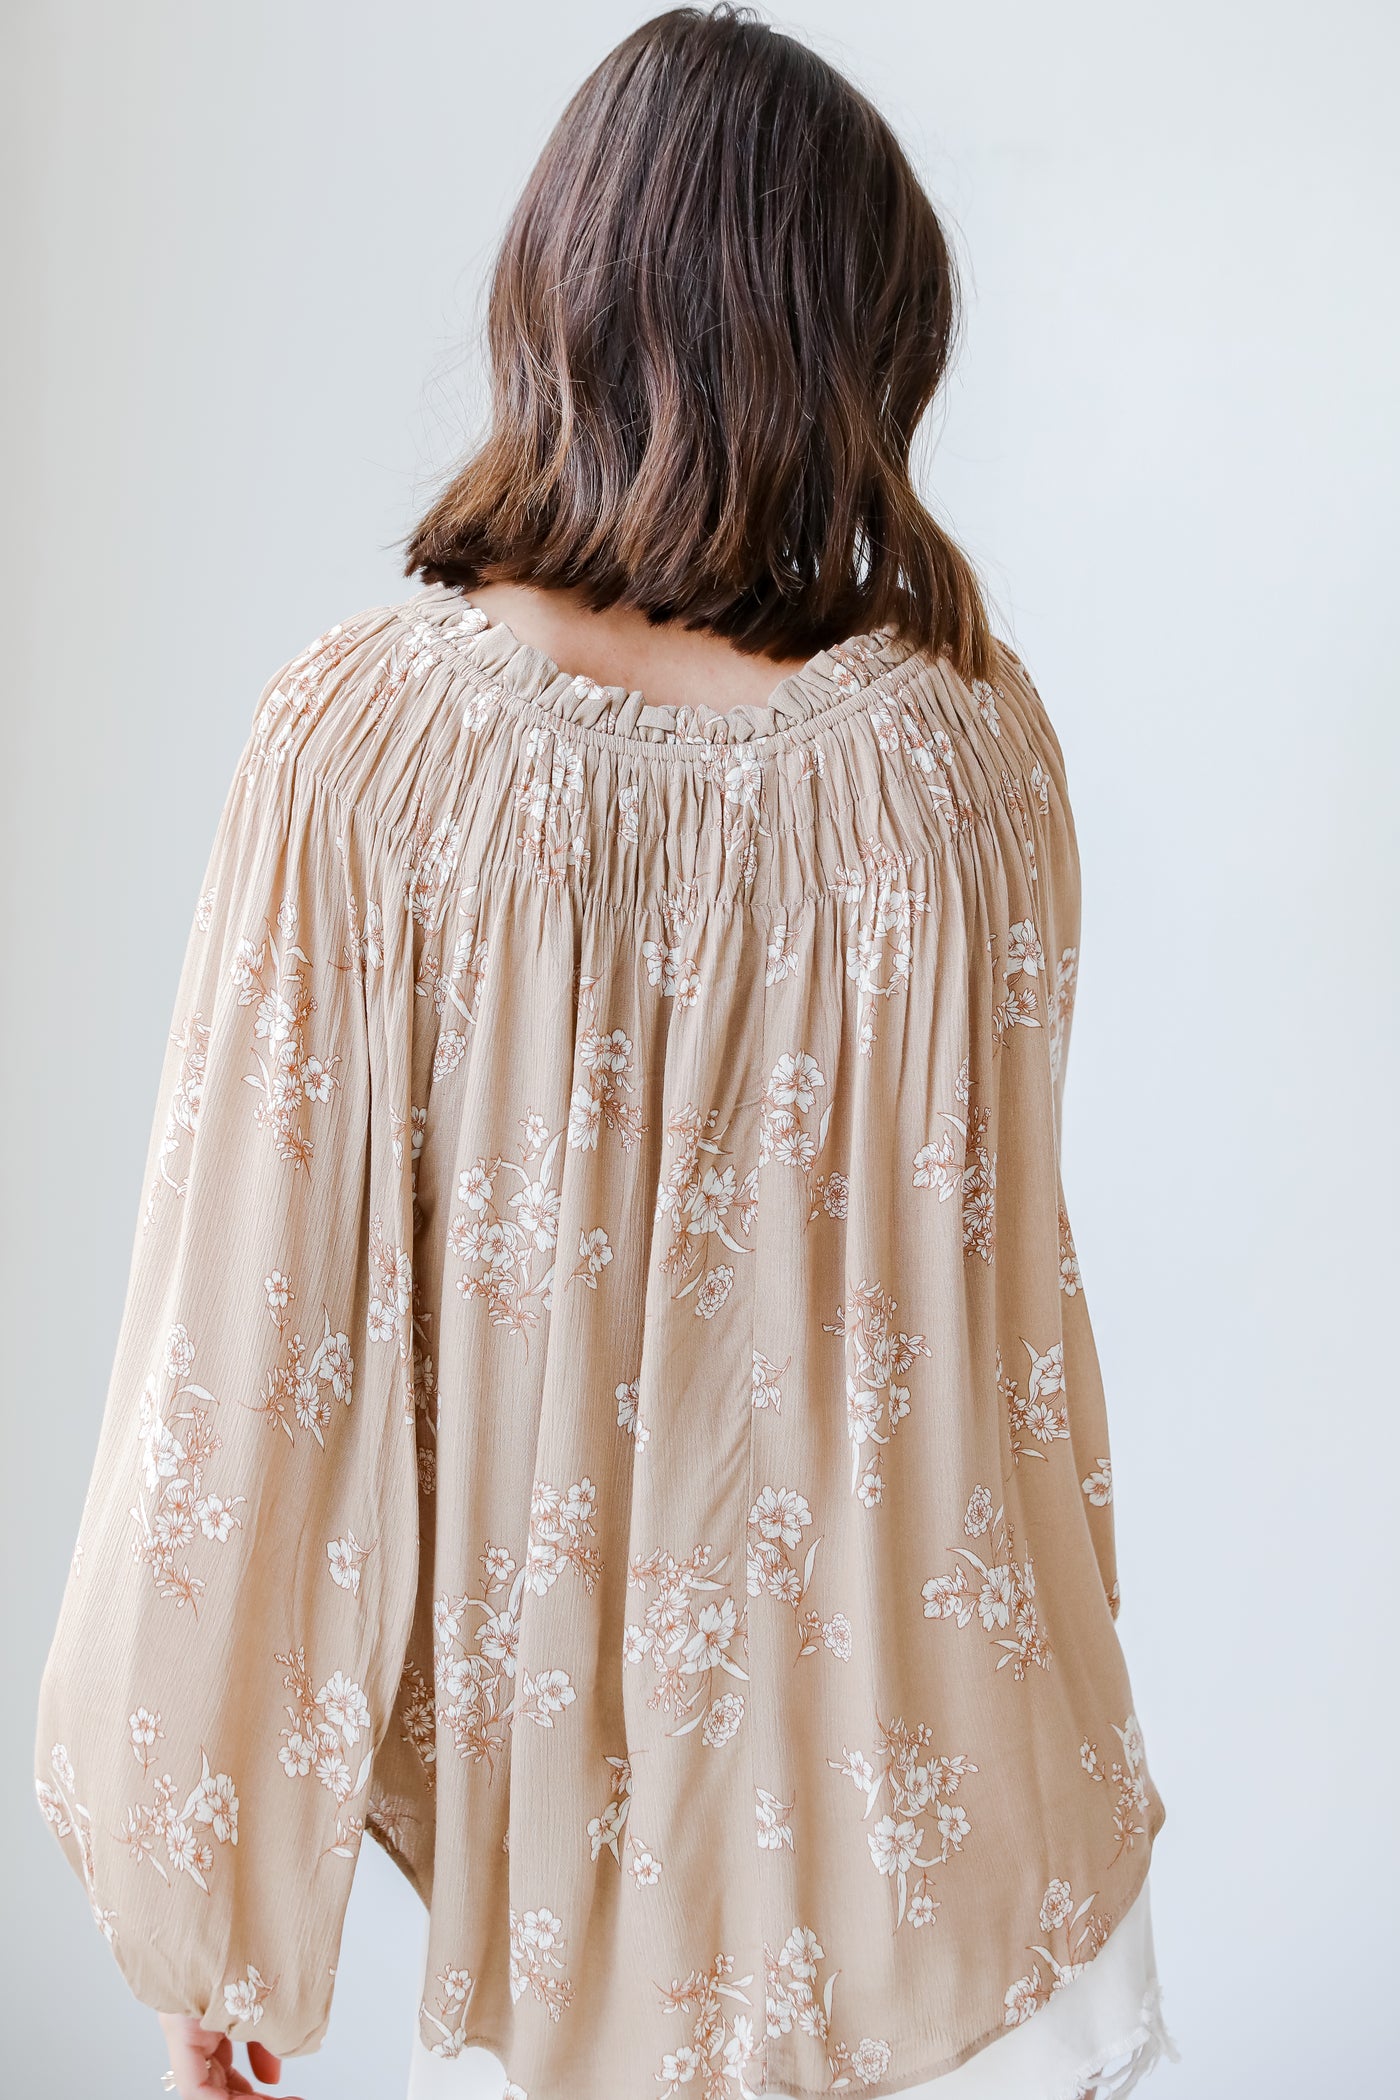 Floral Blouse in taupe back view